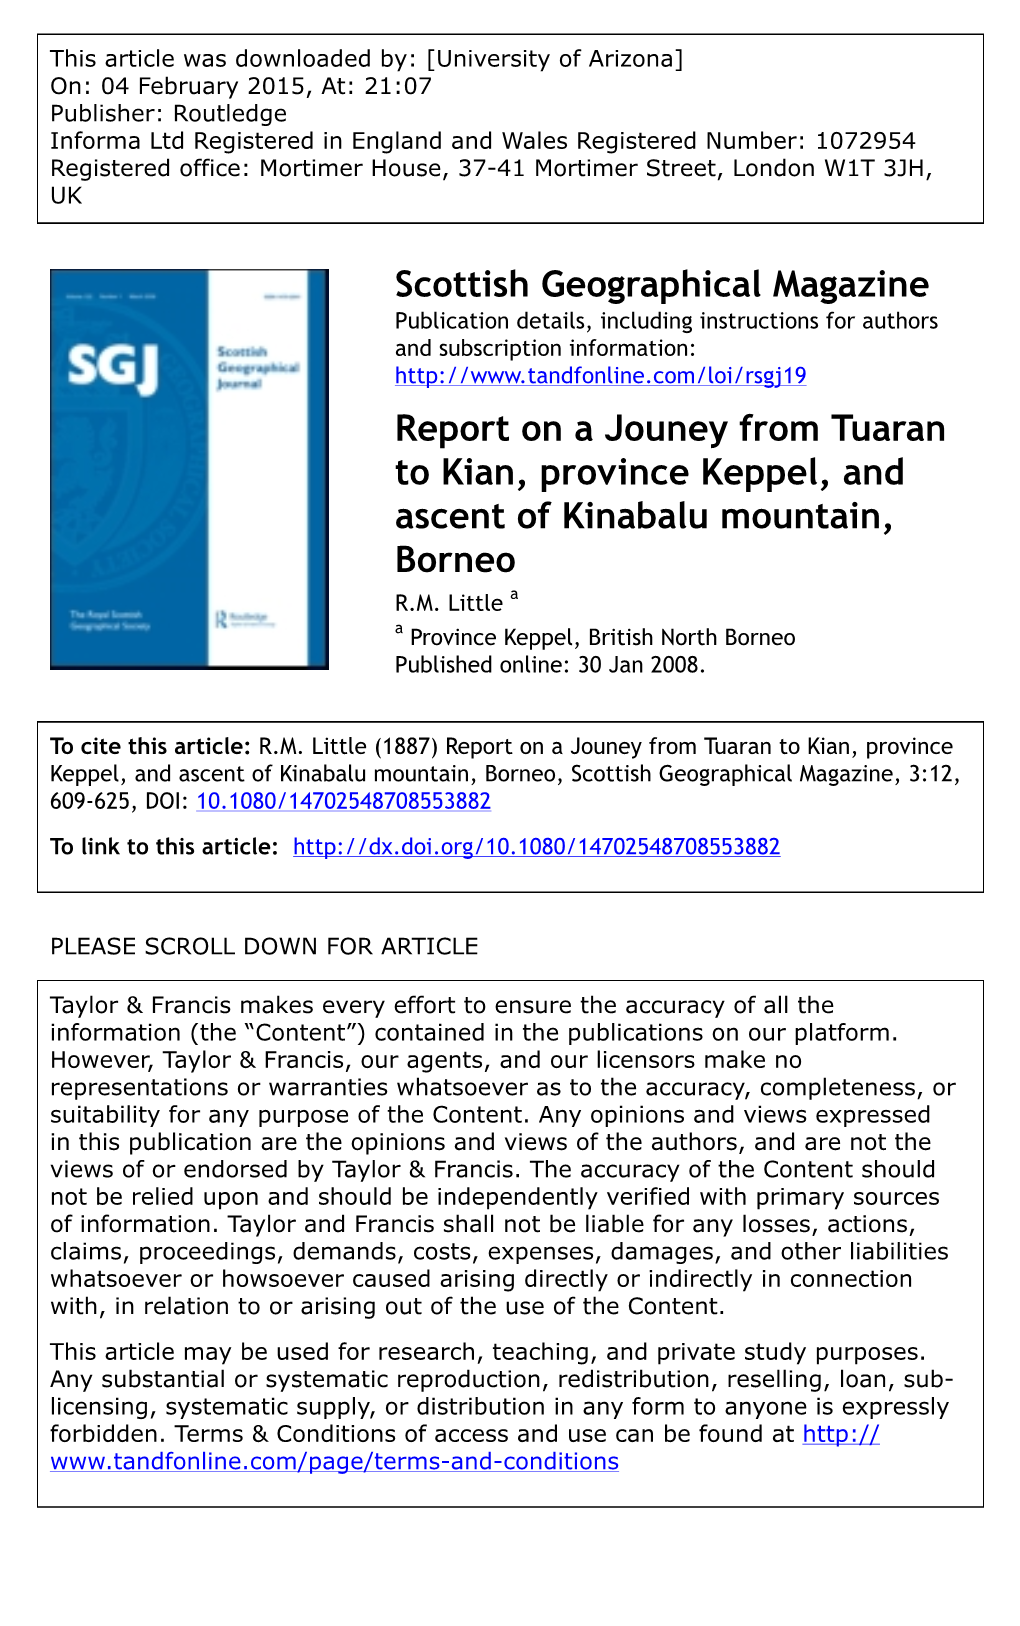 Scottish Geographical Magazine Report on a Jouney from Tuaran to Kian, Province Keppel, and Ascent of Kinabalu Mountain, Borneo